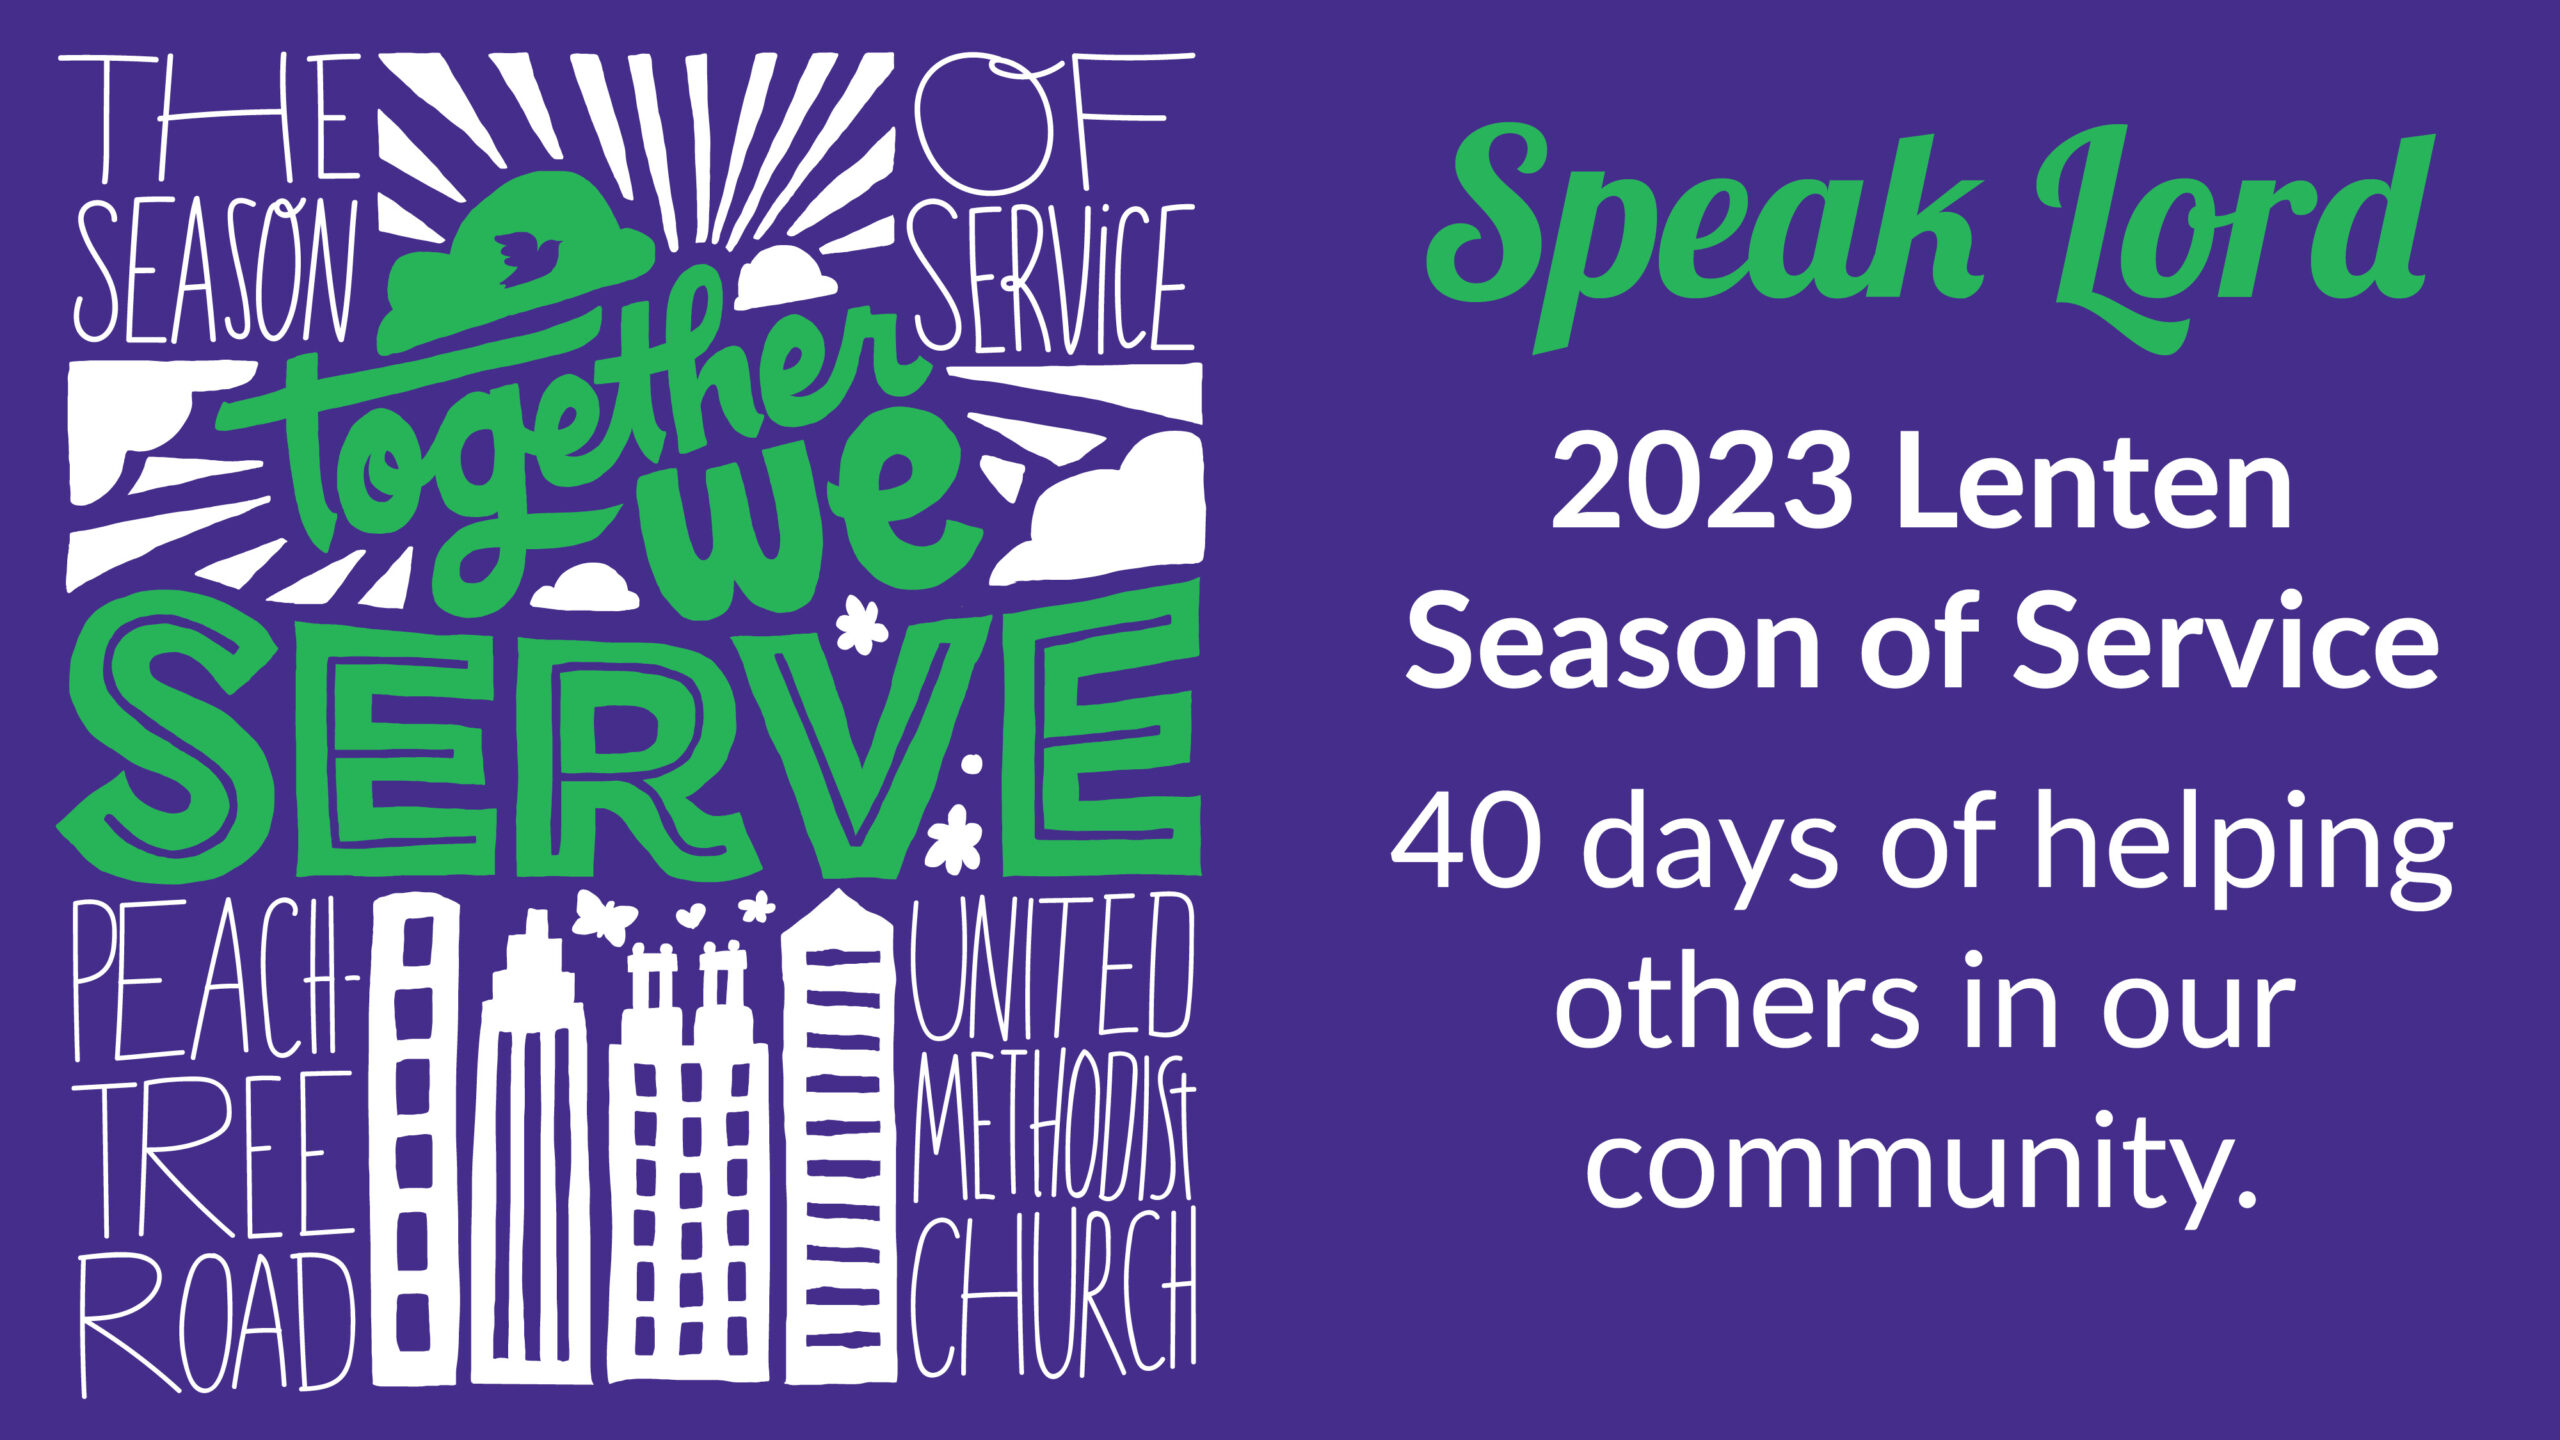 The Season of Service - 40 days of helping others in our community.